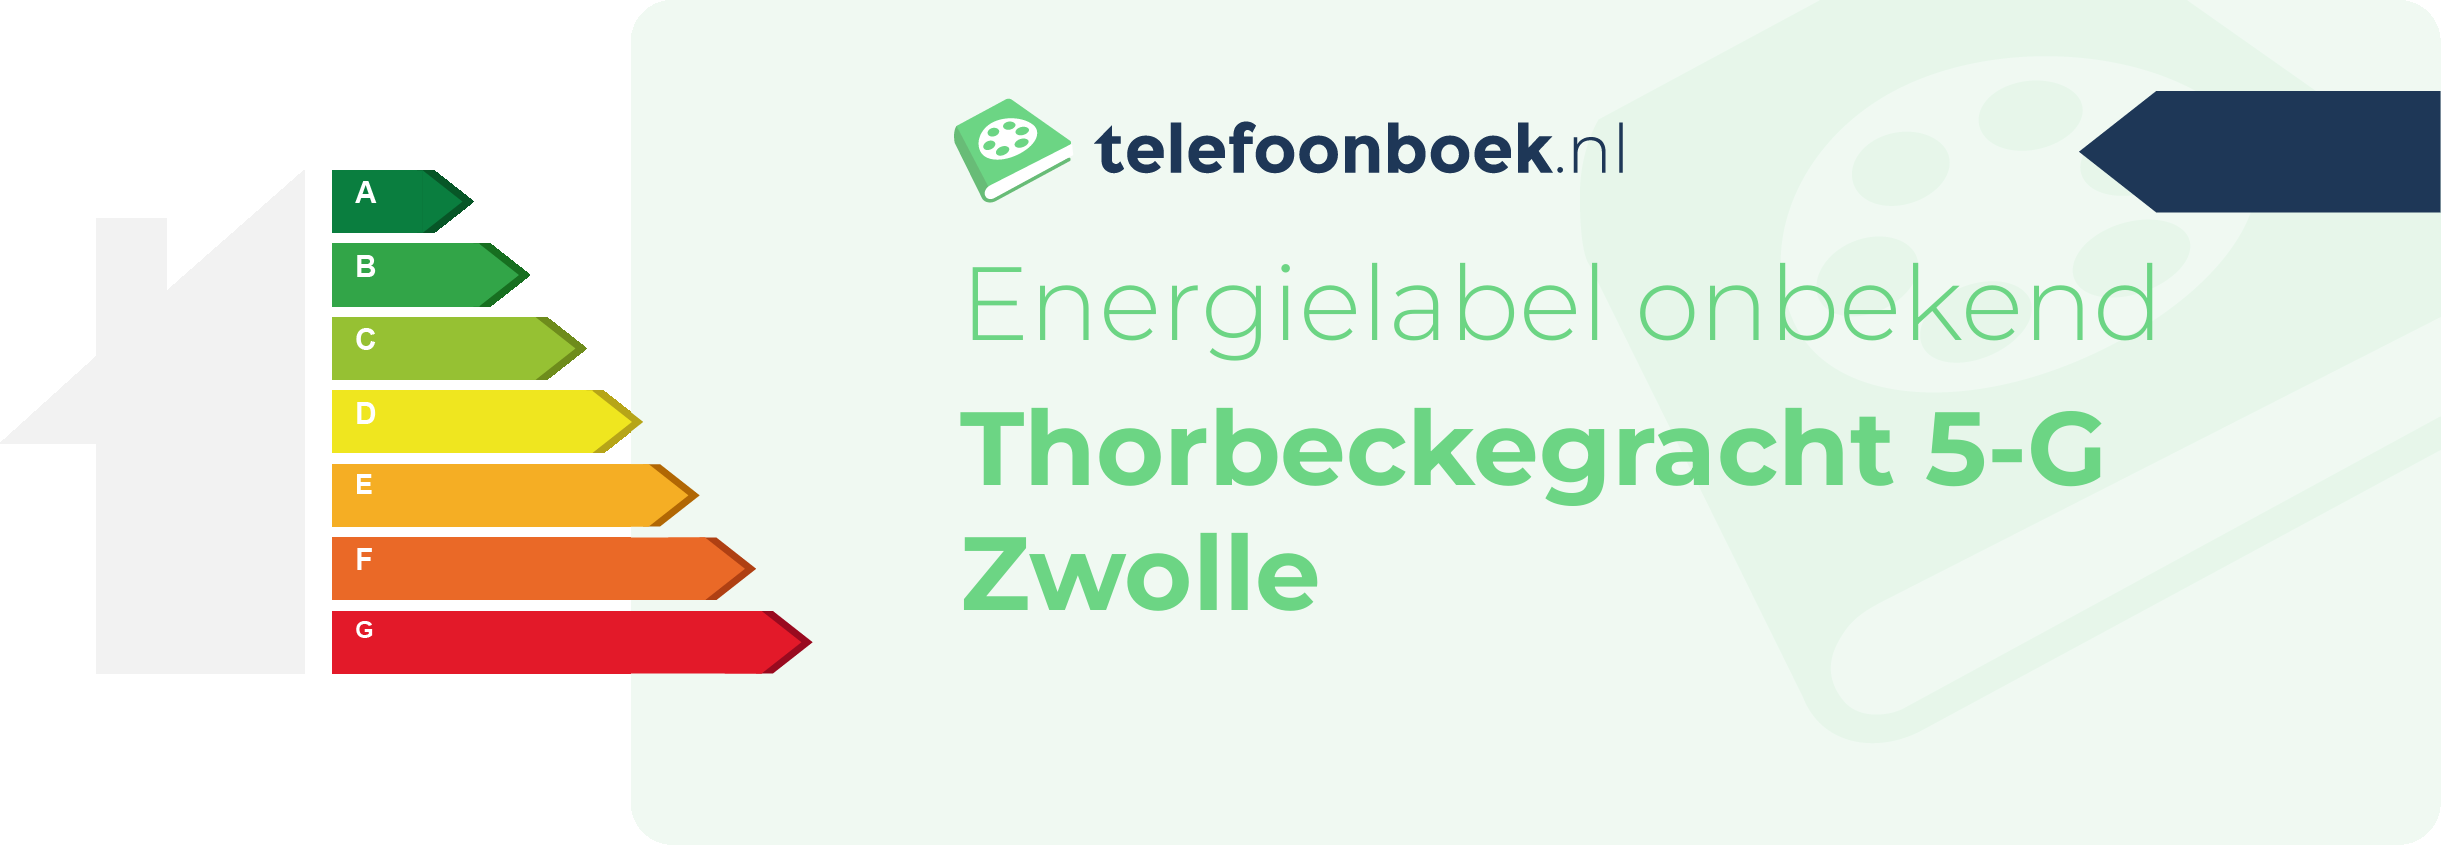 Energielabel Thorbeckegracht 5-G Zwolle